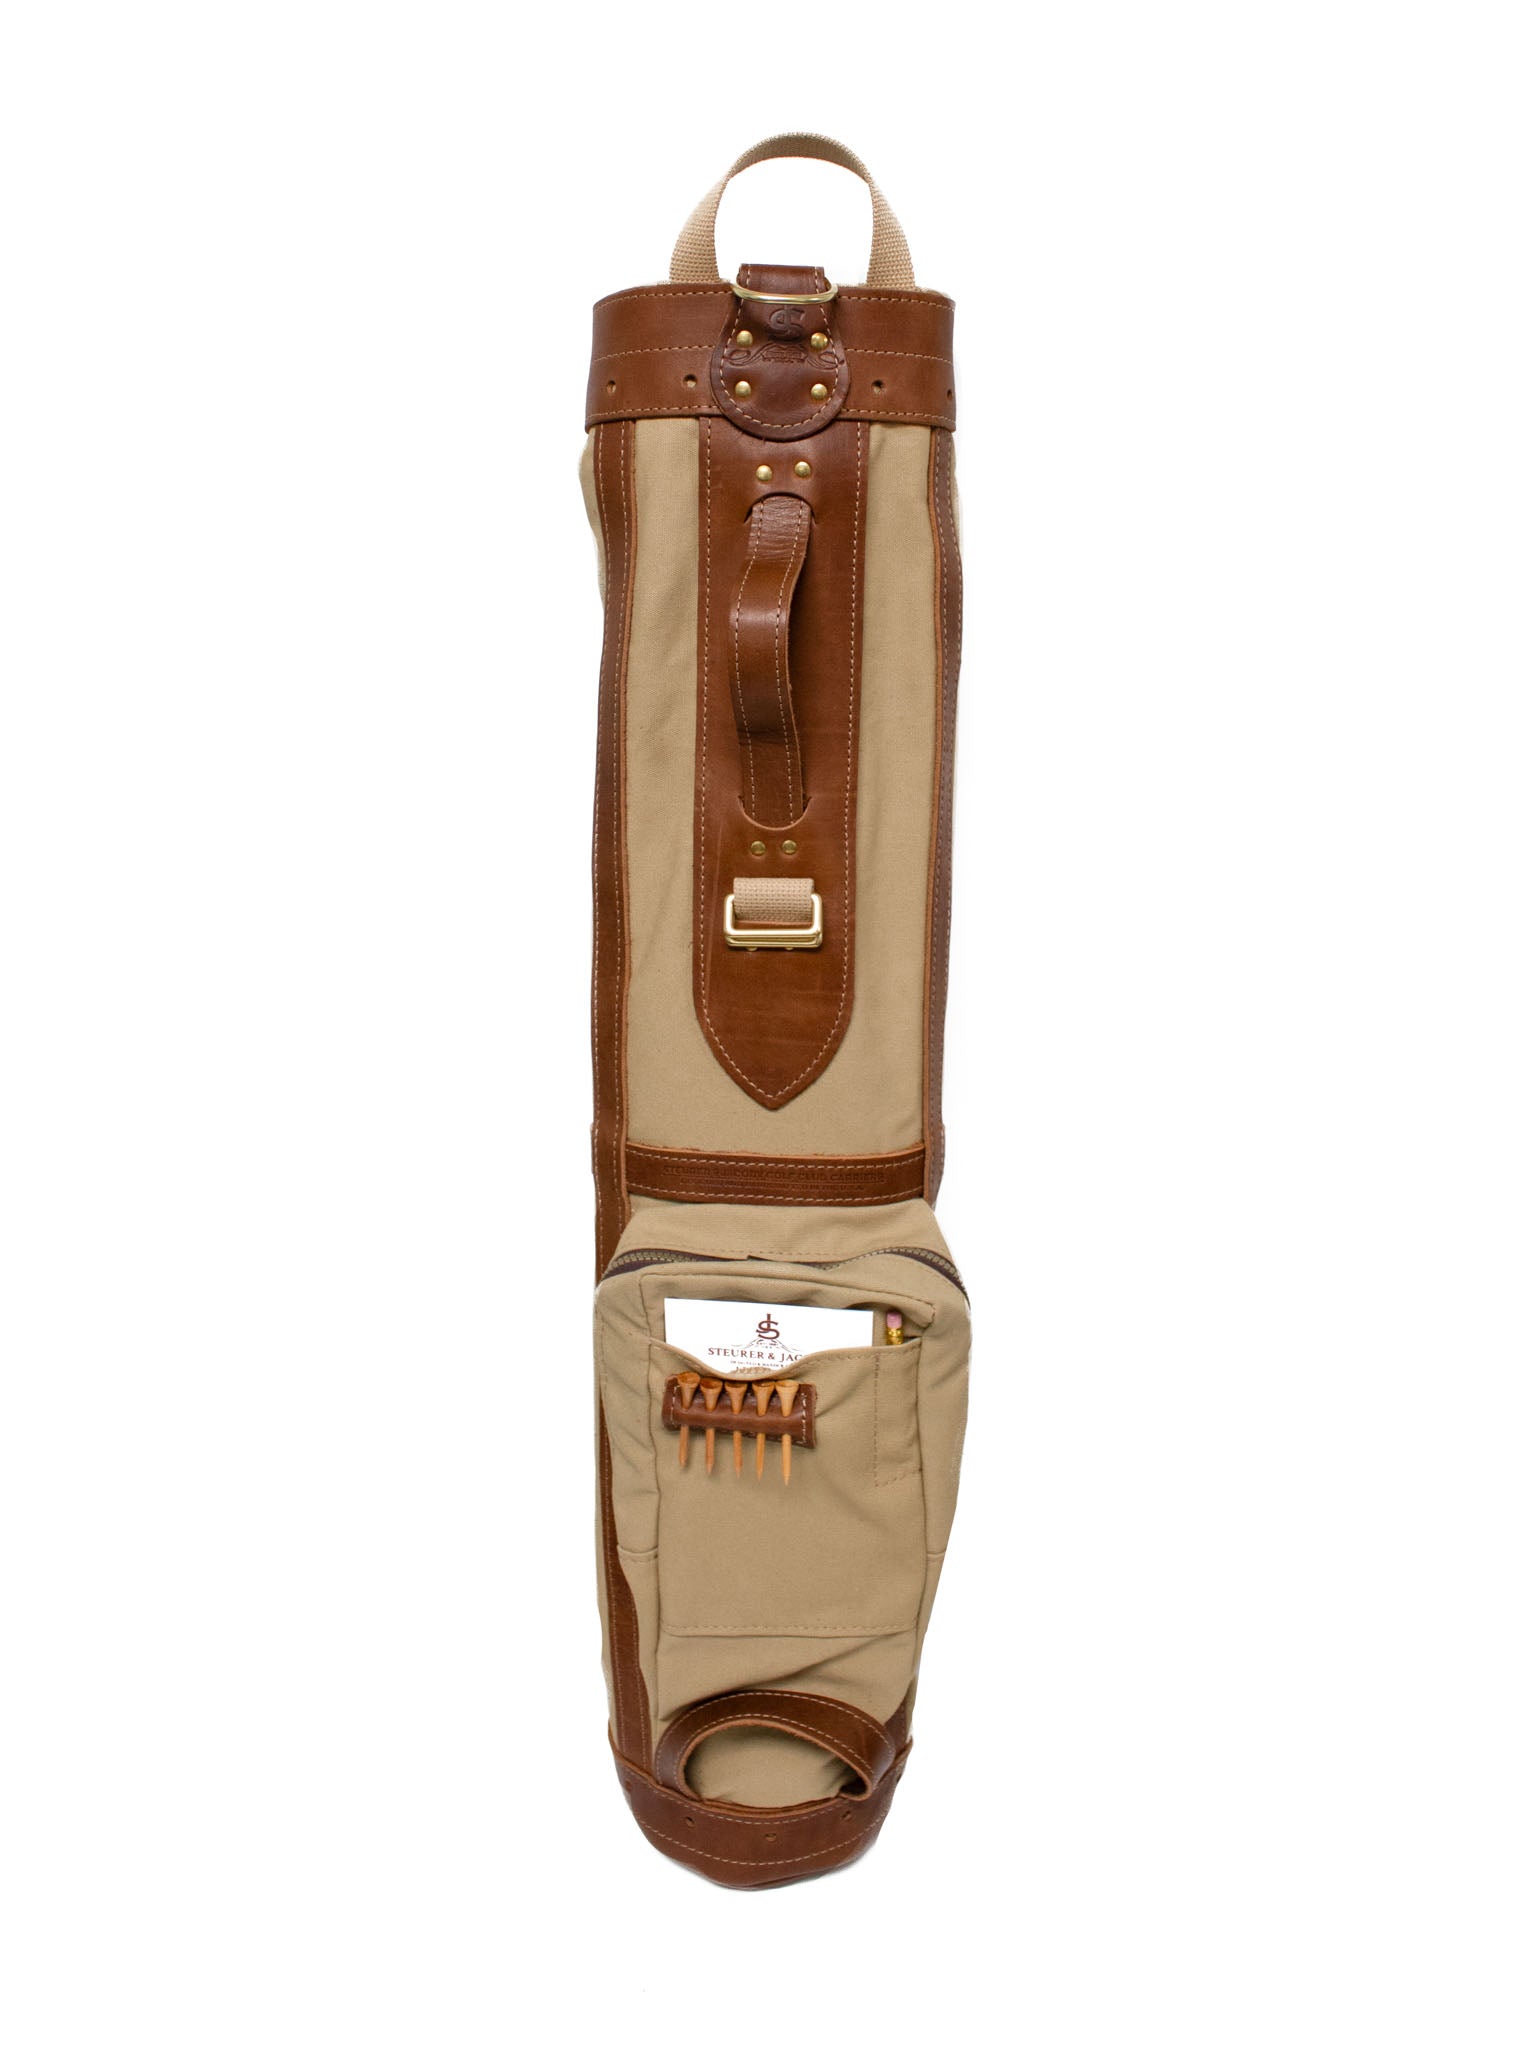 Pencil Style Golf Bag- British Tan with Natural Leather